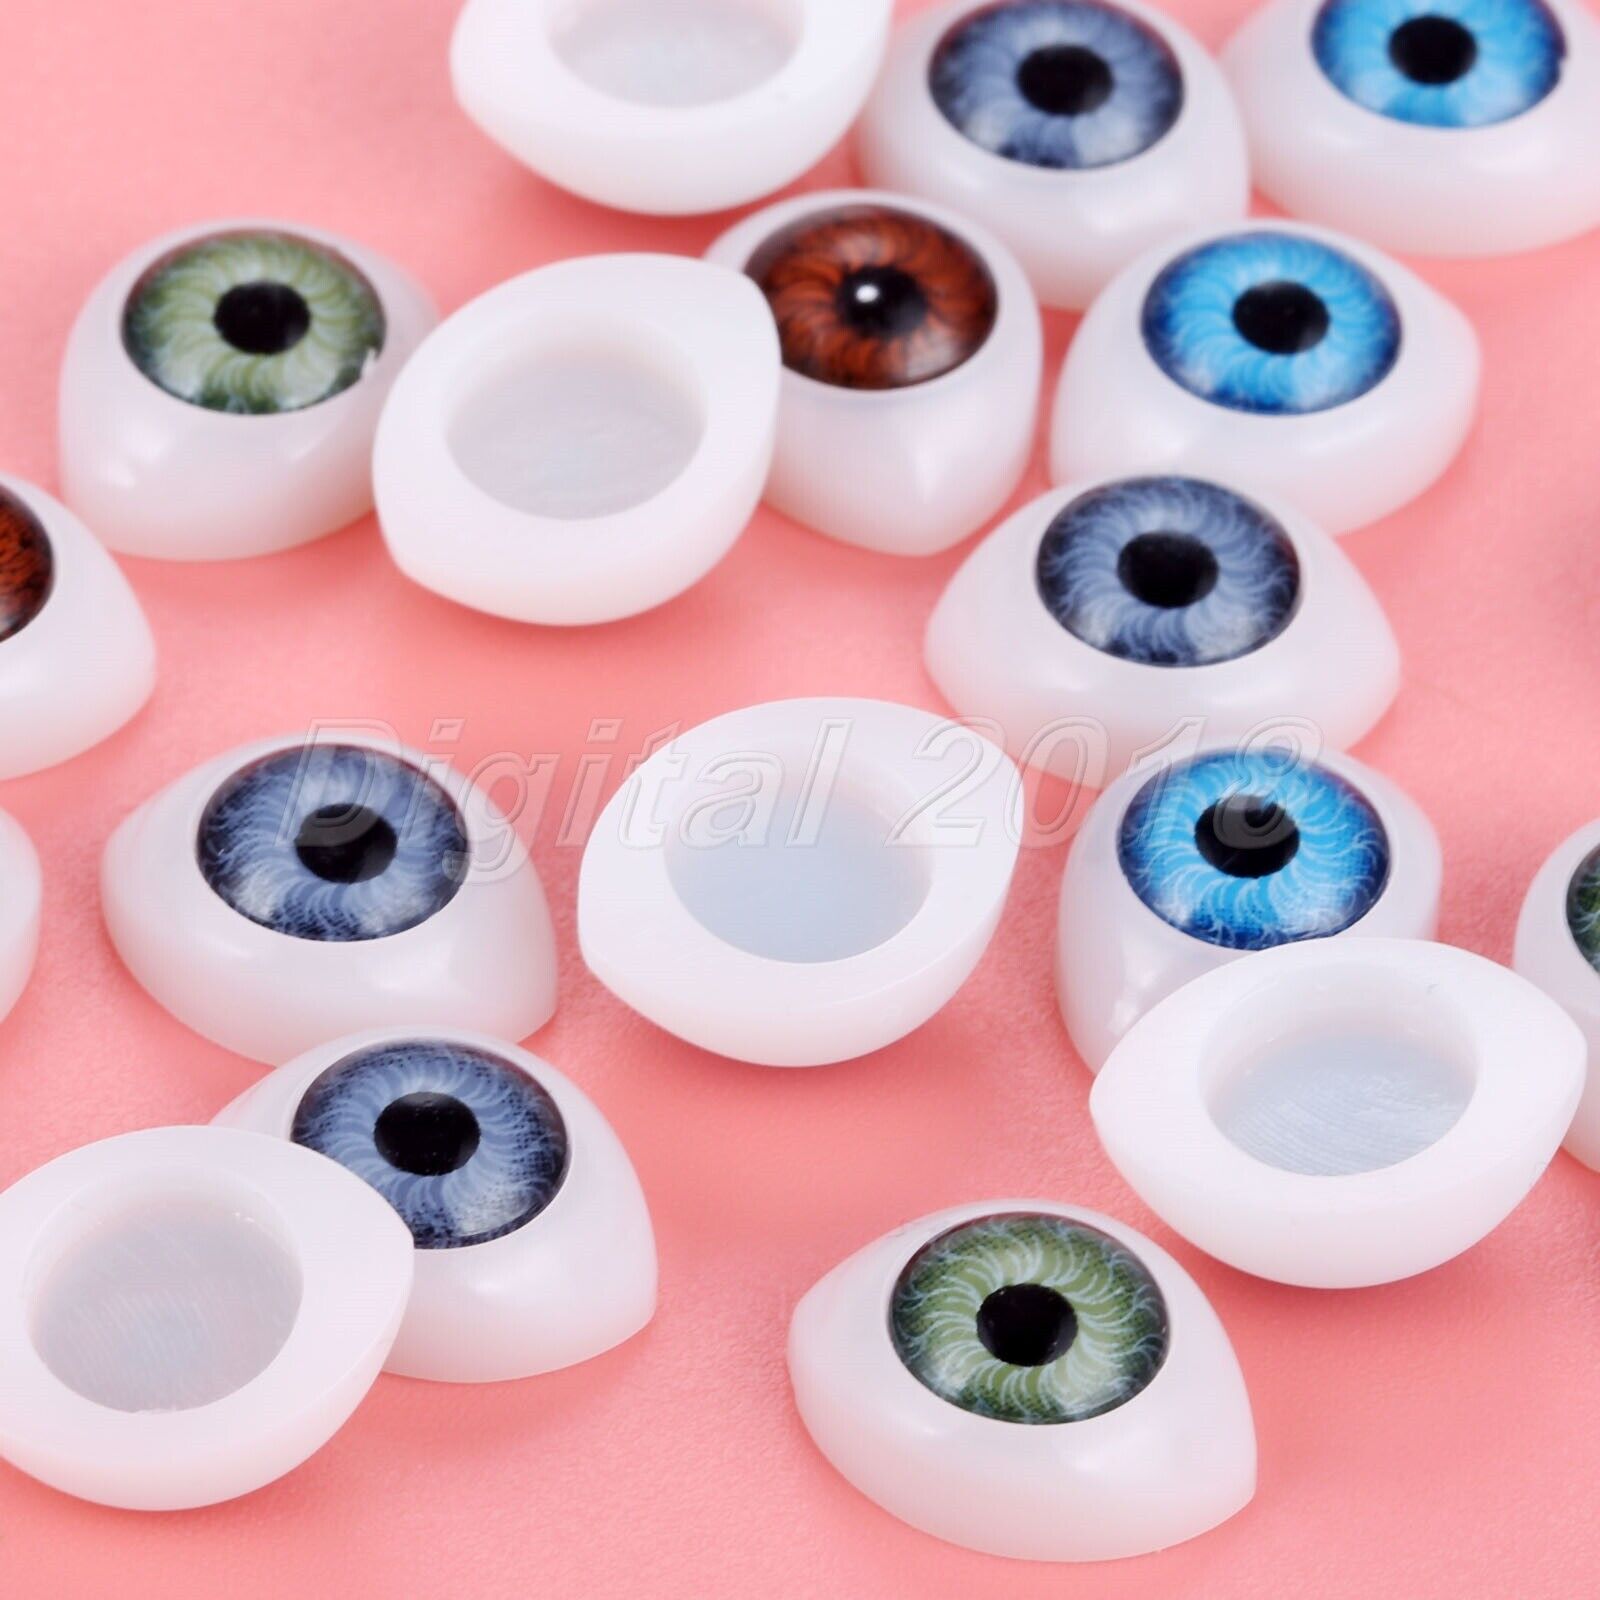 100Pcs 0.47"*0.63" Safety Doll Eyes Toys For Doll Making Eyes Doll Accessories Unbranded Does Not Apply - фотография #9